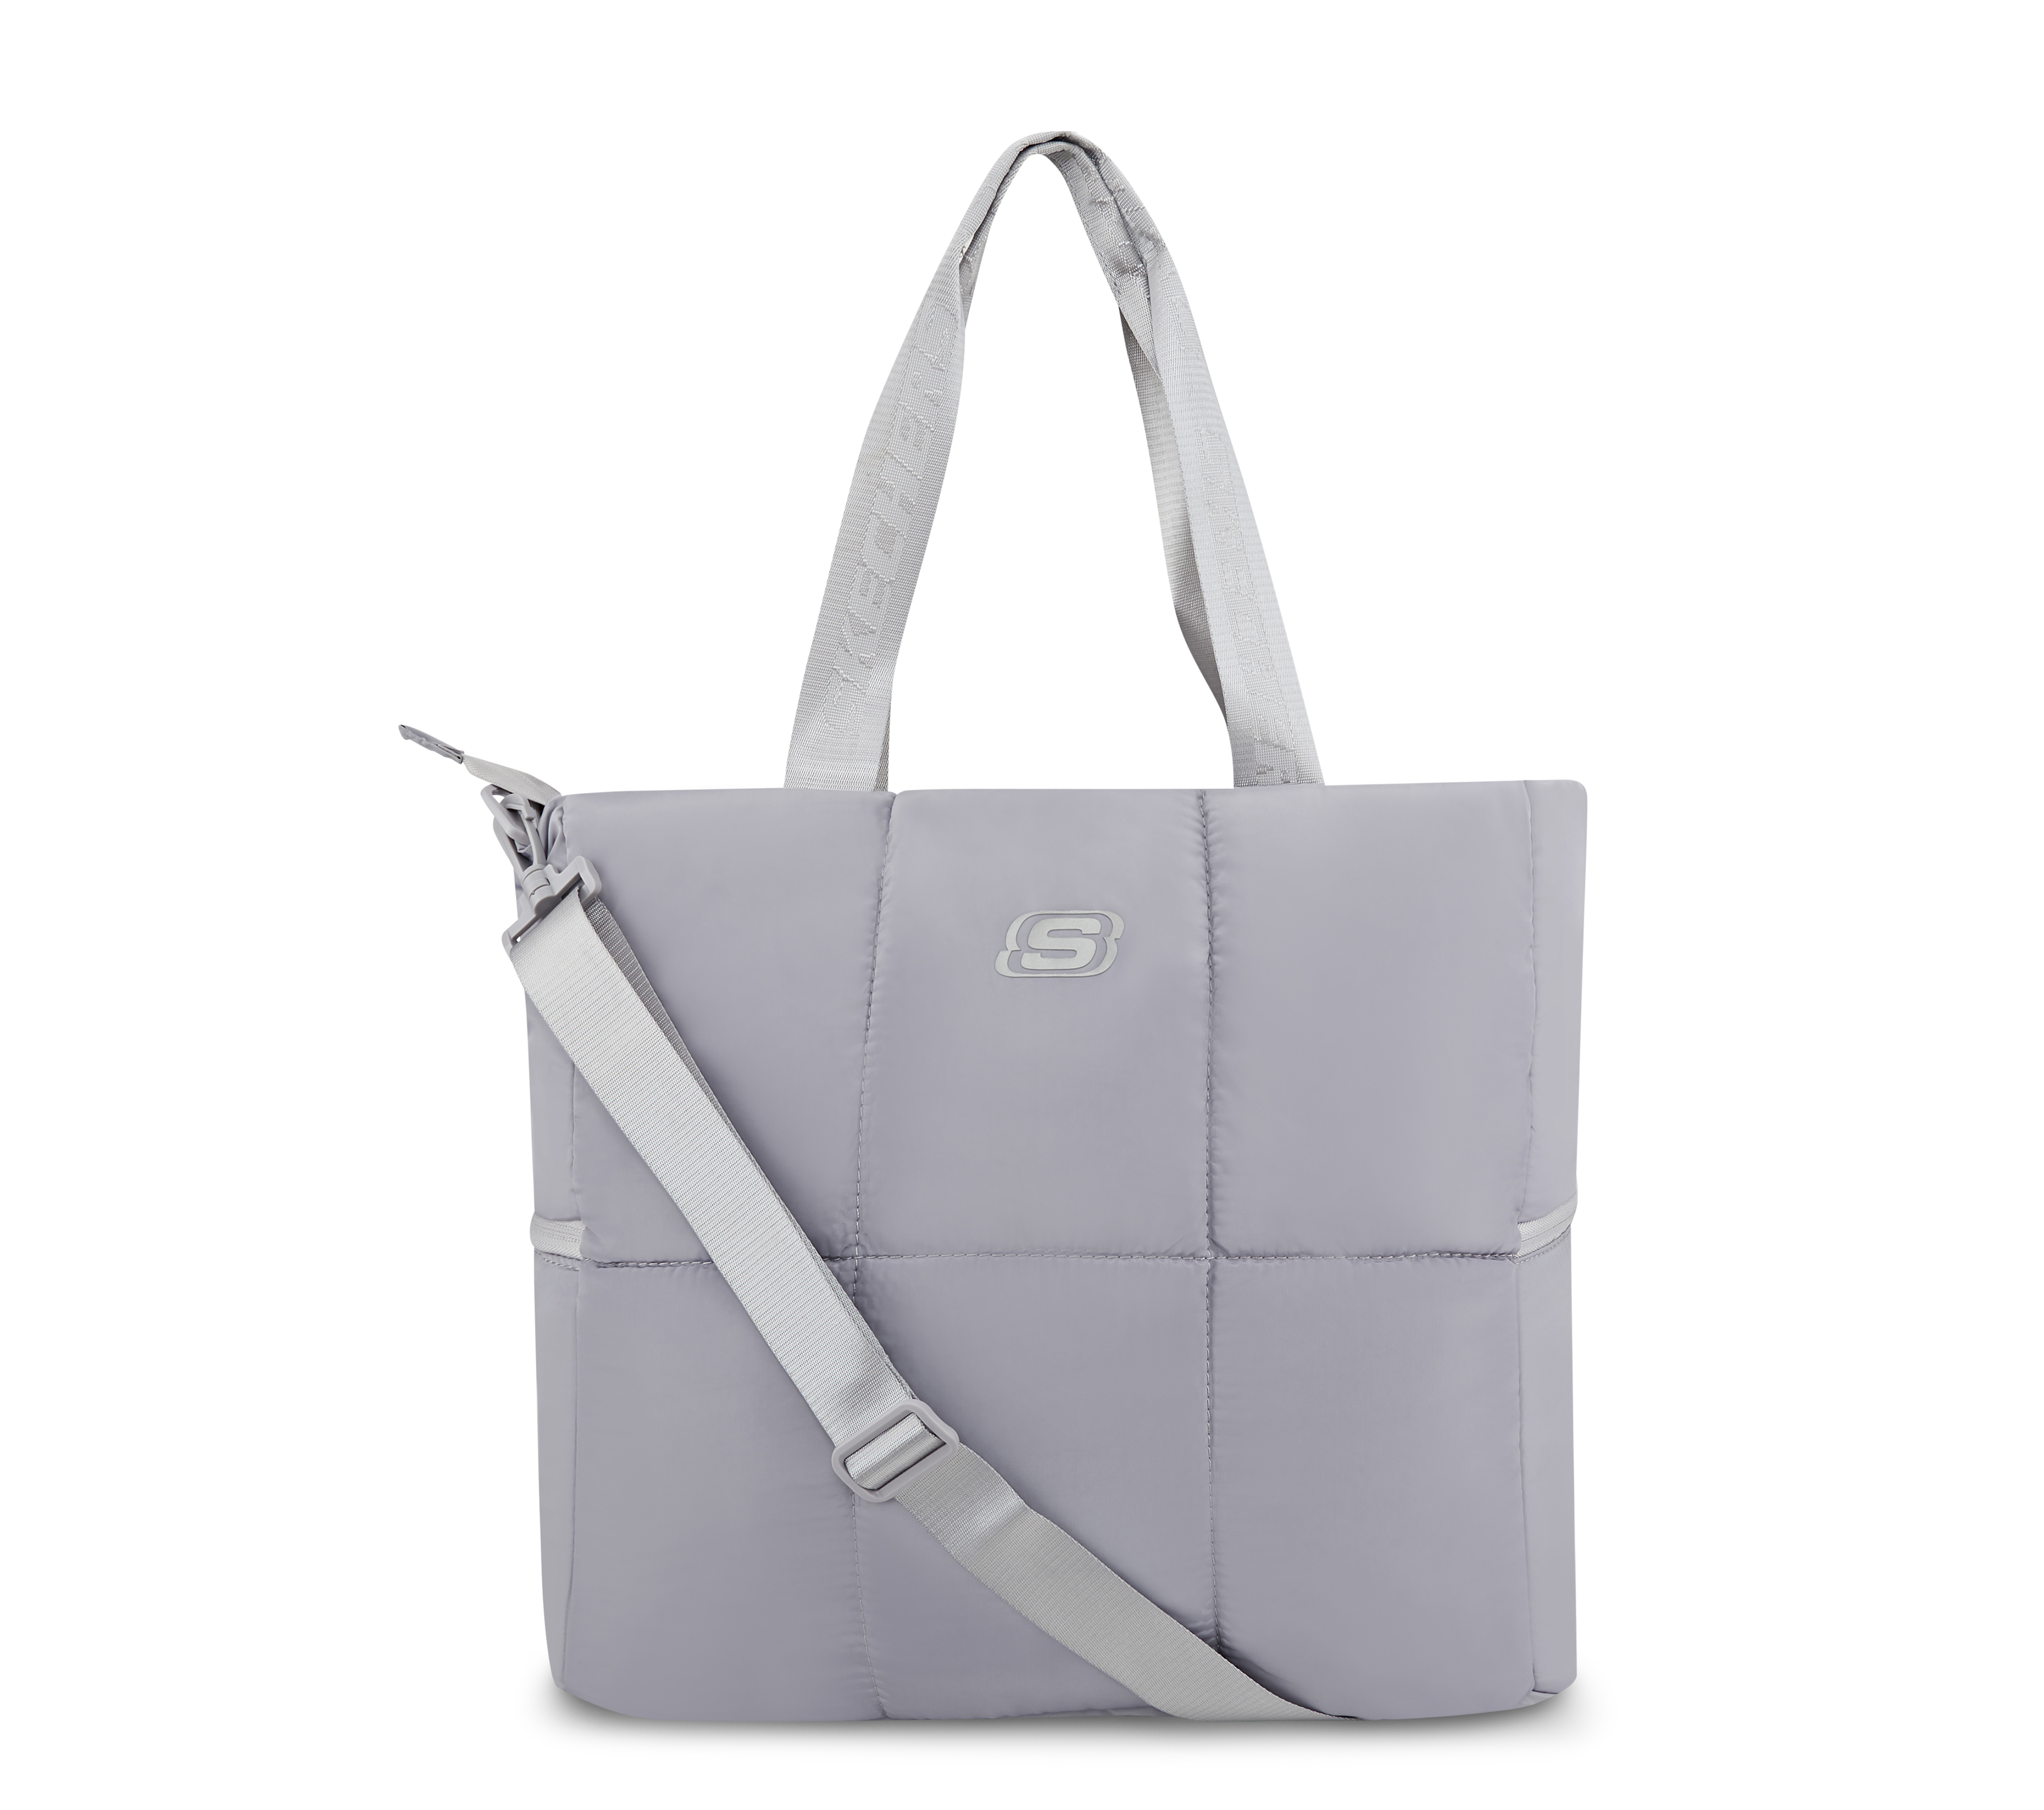 TOTE, GREY Accessories Lateral View